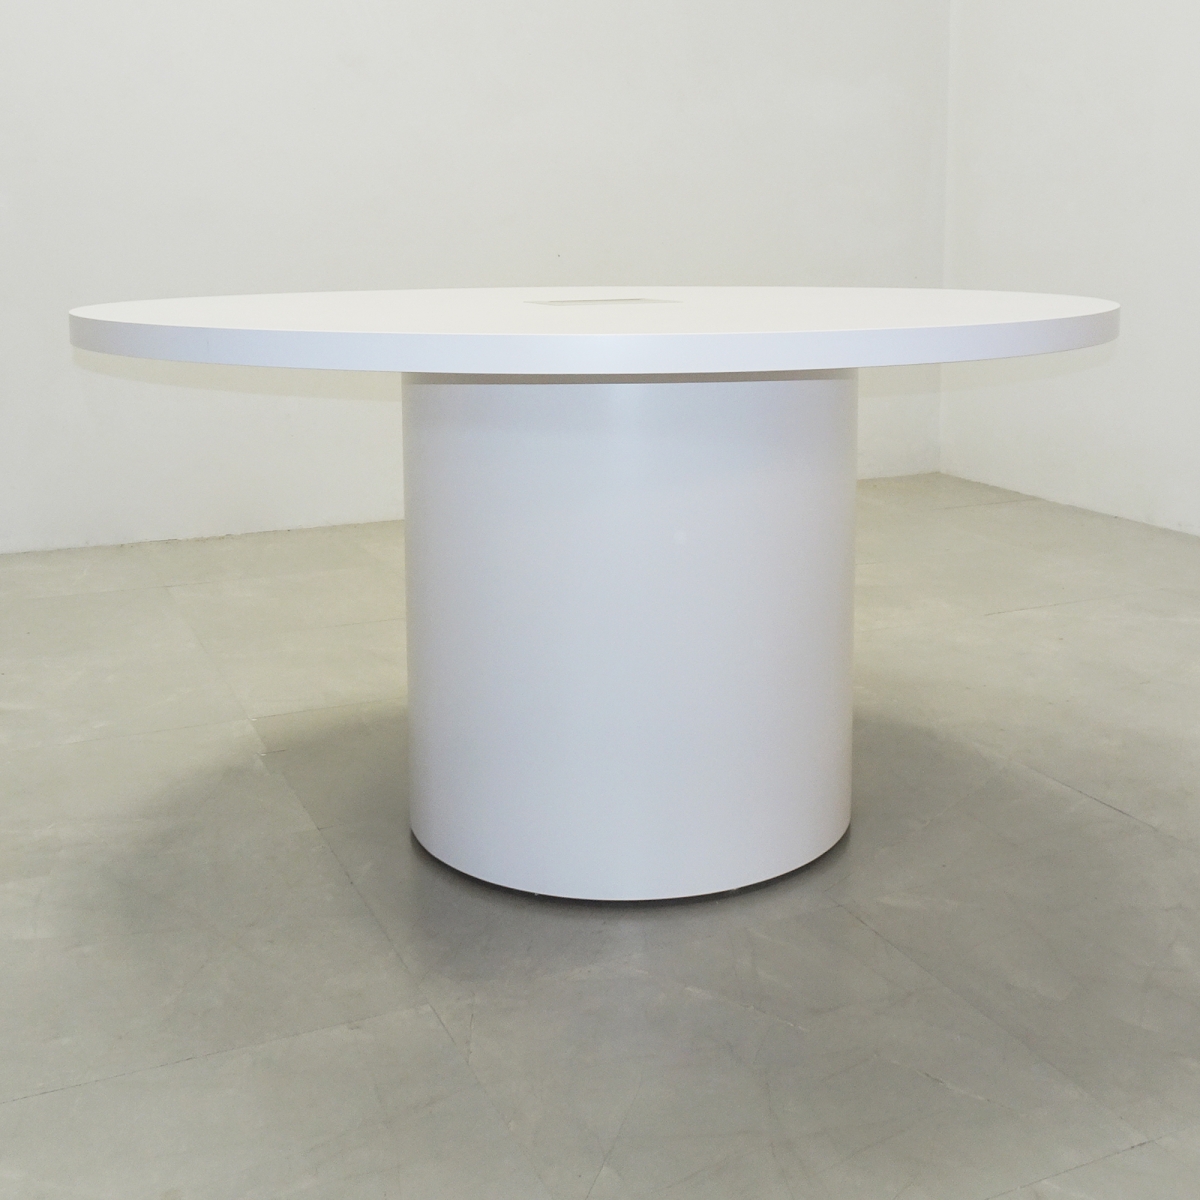 60 In. Axis Round Matte Meeting Table -Stock # 1001-D